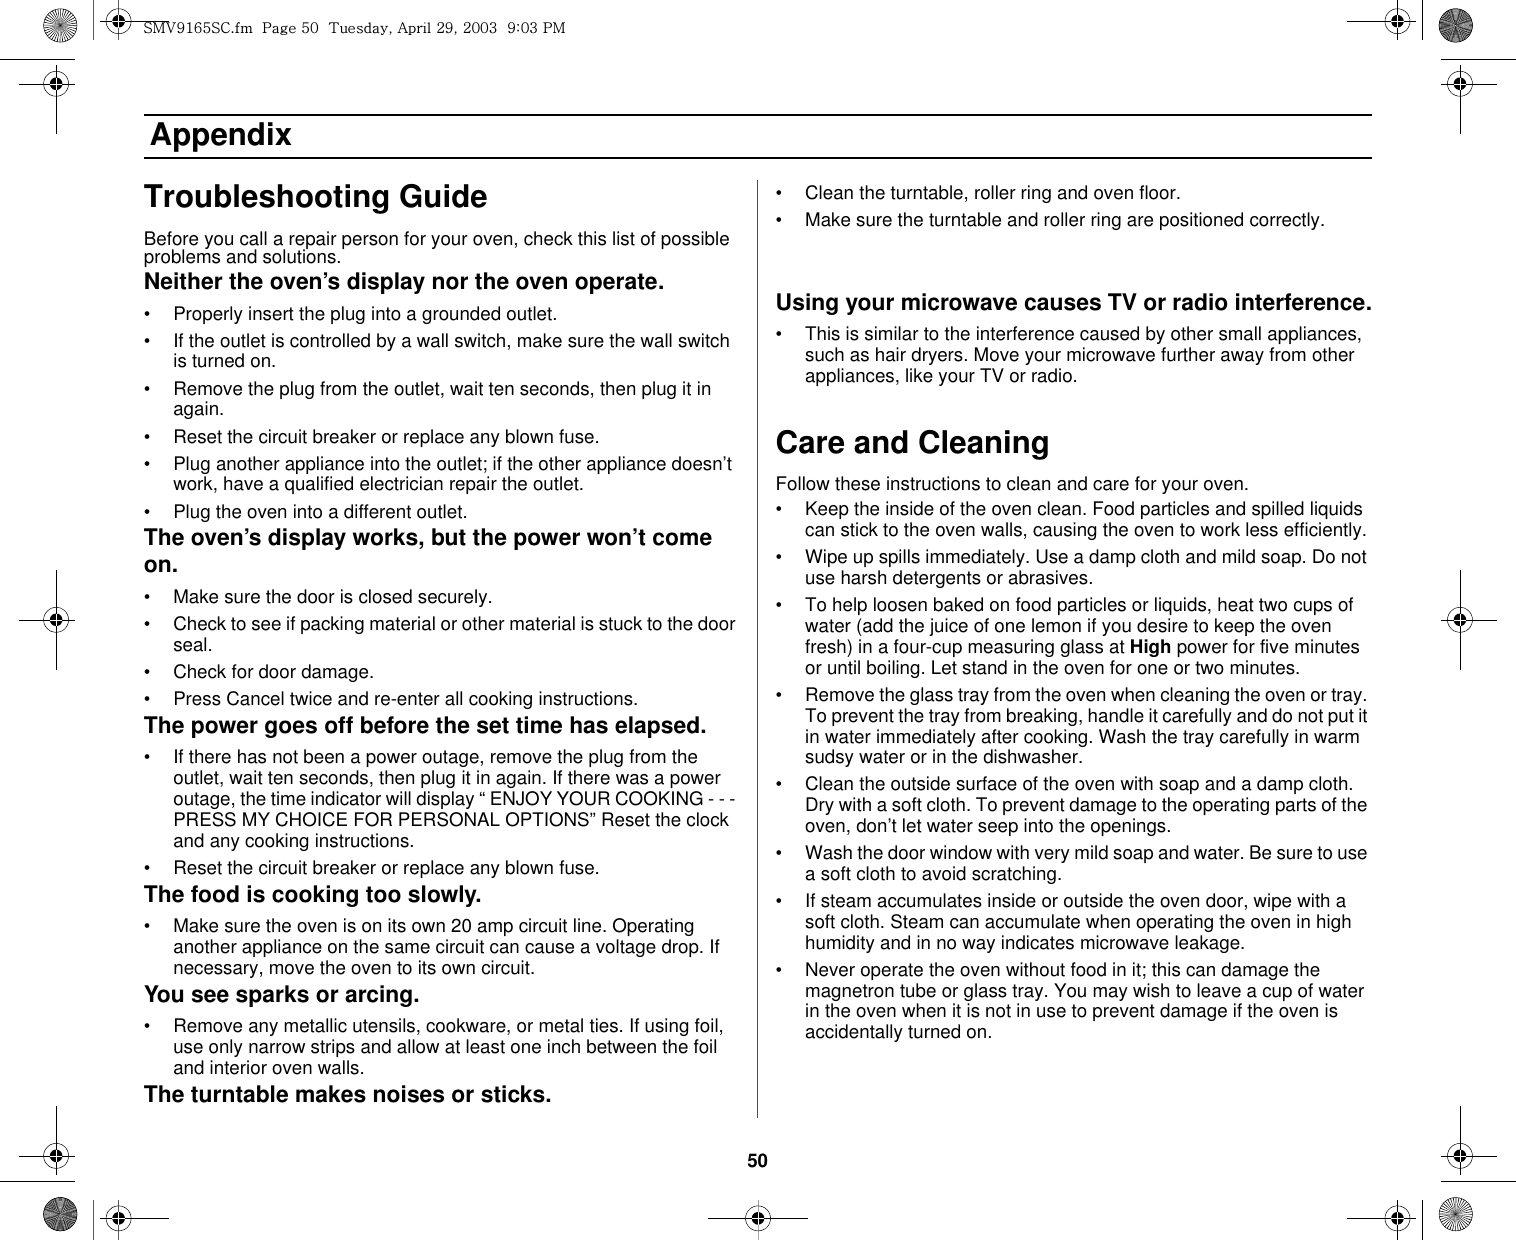 50 AppendixTroubleshooting GuideBefore you call a repair person for your oven, check this list of possible problems and solutions.Neither the oven’s display nor the oven operate.• Properly insert the plug into a grounded outlet. • If the outlet is controlled by a wall switch, make sure the wall switch is turned on. • Remove the plug from the outlet, wait ten seconds, then plug it in again. • Reset the circuit breaker or replace any blown fuse.• Plug another appliance into the outlet; if the other appliance doesn’t work, have a qualified electrician repair the outlet. • Plug the oven into a different outlet.The oven’s display works, but the power won’t come on.• Make sure the door is closed securely.• Check to see if packing material or other material is stuck to the door seal. • Check for door damage.• Press Cancel twice and re-enter all cooking instructions.The power goes off before the set time has elapsed.• If there has not been a power outage, remove the plug from the outlet, wait ten seconds, then plug it in again. If there was a power outage, the time indicator will display “ ENJOY YOUR COOKING - - - PRESS MY CHOICE FOR PERSONAL OPTIONS” Reset the clock and any cooking instructions. • Reset the circuit breaker or replace any blown fuse. The food is cooking too slowly.• Make sure the oven is on its own 20 amp circuit line. Operating another appliance on the same circuit can cause a voltage drop. If necessary, move the oven to its own circuit.You see sparks or arcing.• Remove any metallic utensils, cookware, or metal ties. If using foil, use only narrow strips and allow at least one inch between the foil and interior oven walls.The turntable makes noises or sticks.• Clean the turntable, roller ring and oven floor. • Make sure the turntable and roller ring are positioned correctly.Using your microwave causes TV or radio interference.• This is similar to the interference caused by other small appliances, such as hair dryers. Move your microwave further away from other appliances, like your TV or radio.Care and CleaningFollow these instructions to clean and care for your oven.• Keep the inside of the oven clean. Food particles and spilled liquids can stick to the oven walls, causing the oven to work less efficiently.• Wipe up spills immediately. Use a damp cloth and mild soap. Do not use harsh detergents or abrasives. • To help loosen baked on food particles or liquids, heat two cups of water (add the juice of one lemon if you desire to keep the oven fresh) in a four-cup measuring glass at High power for five minutes or until boiling. Let stand in the oven for one or two minutes. • Remove the glass tray from the oven when cleaning the oven or tray. To prevent the tray from breaking, handle it carefully and do not put it in water immediately after cooking. Wash the tray carefully in warm sudsy water or in the dishwasher. • Clean the outside surface of the oven with soap and a damp cloth. Dry with a soft cloth. To prevent damage to the operating parts of the oven, don’t let water seep into the openings.• Wash the door window with very mild soap and water. Be sure to use a soft cloth to avoid scratching.• If steam accumulates inside or outside the oven door, wipe with a soft cloth. Steam can accumulate when operating the oven in high humidity and in no way indicates microwave leakage.• Never operate the oven without food in it; this can damage the magnetron tube or glass tray. You may wish to leave a cup of water in the oven when it is not in use to prevent damage if the oven is accidentally turned on.zt}`X]\zjUGGwG\WGG{SGhGY`SGYWWZGG`aWZGwt